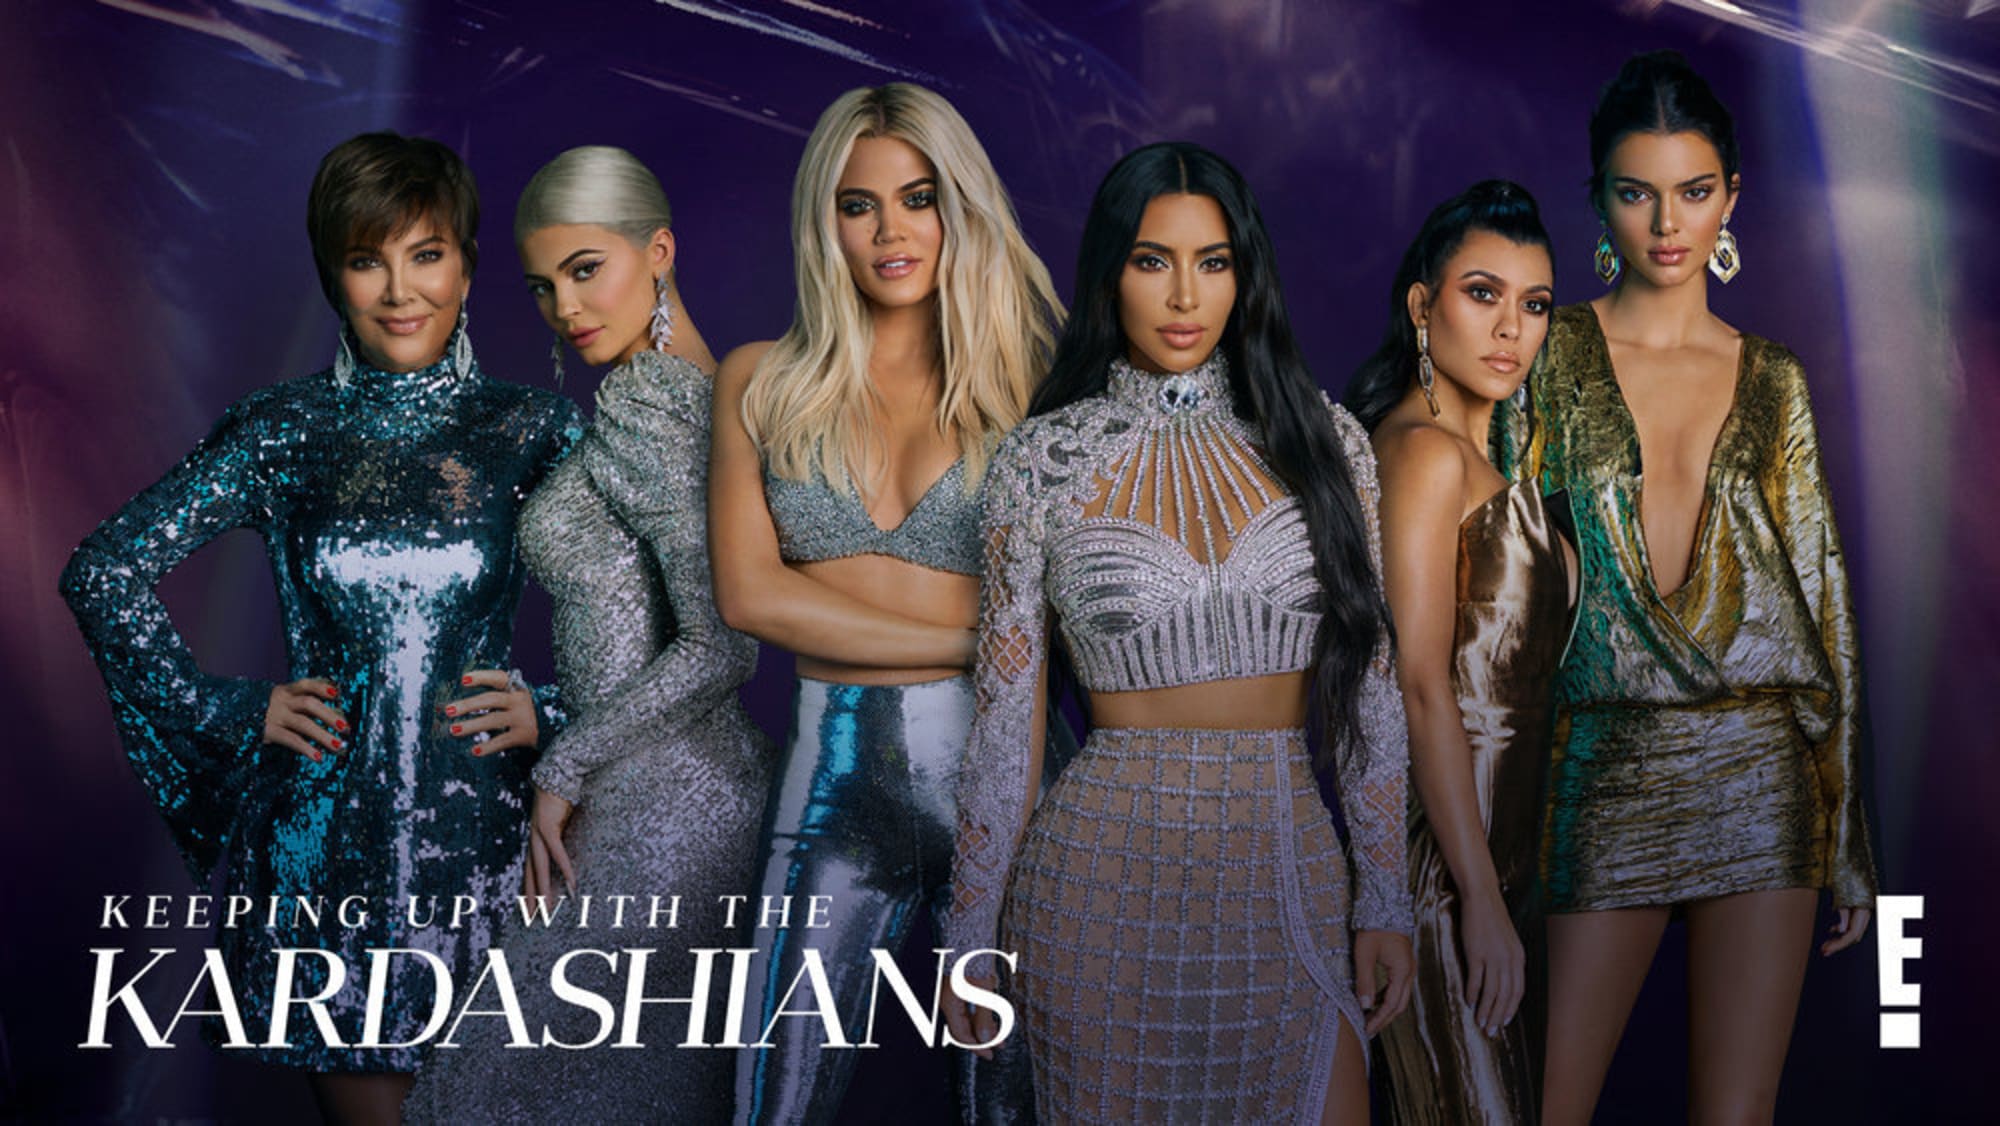 Keeping Up with the Kardashians season 17 is now streaming on Hulu